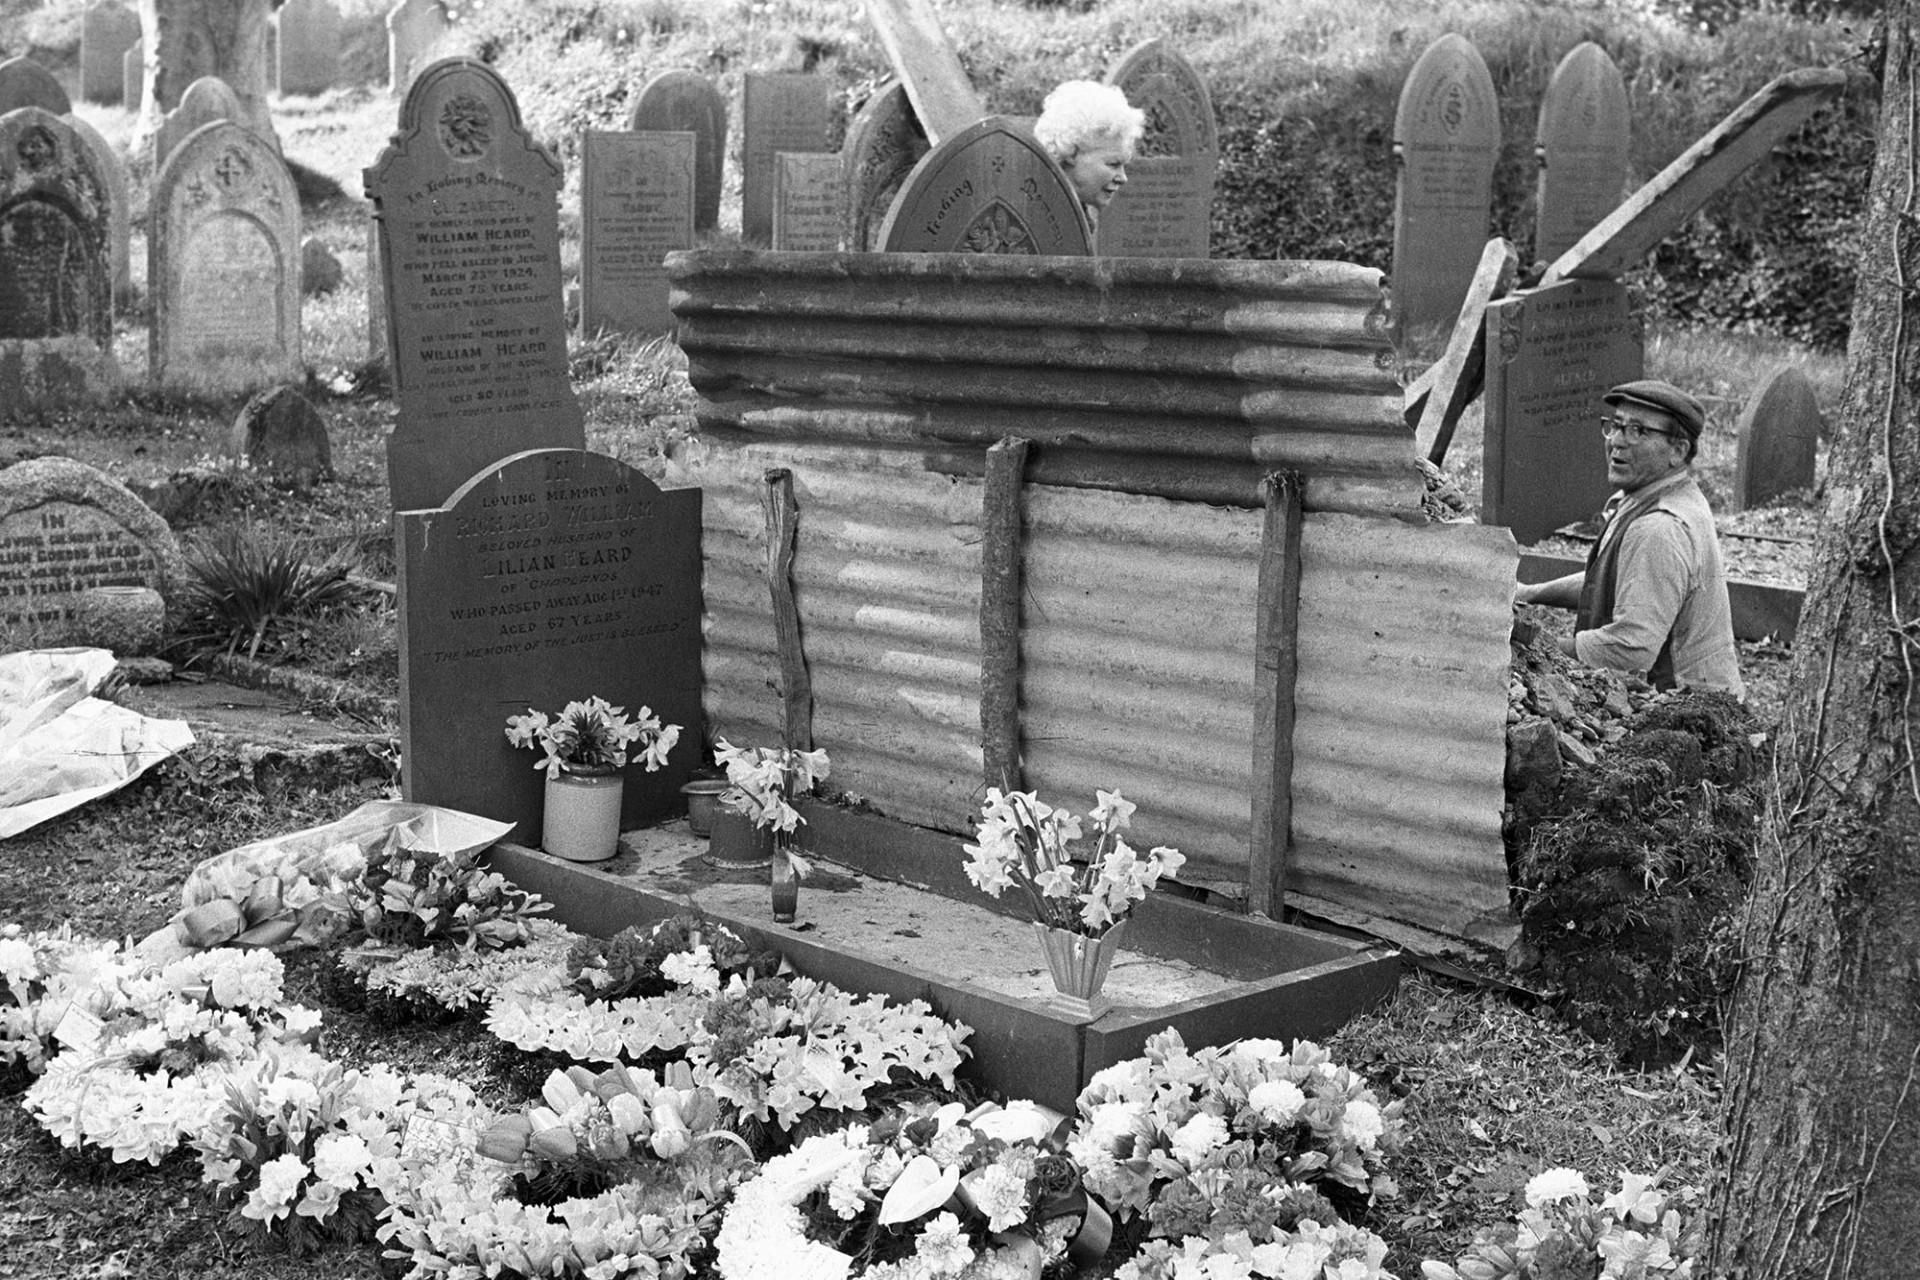 Gravedigger tidying up after burial, flowers in graveyard.
[Gravedigger Reginald Rice tidying Geoff Curtis's grave behind a corrugated iron screen after his funeral in Beaford church.  Another grave and floral tributes are in the foreground.]